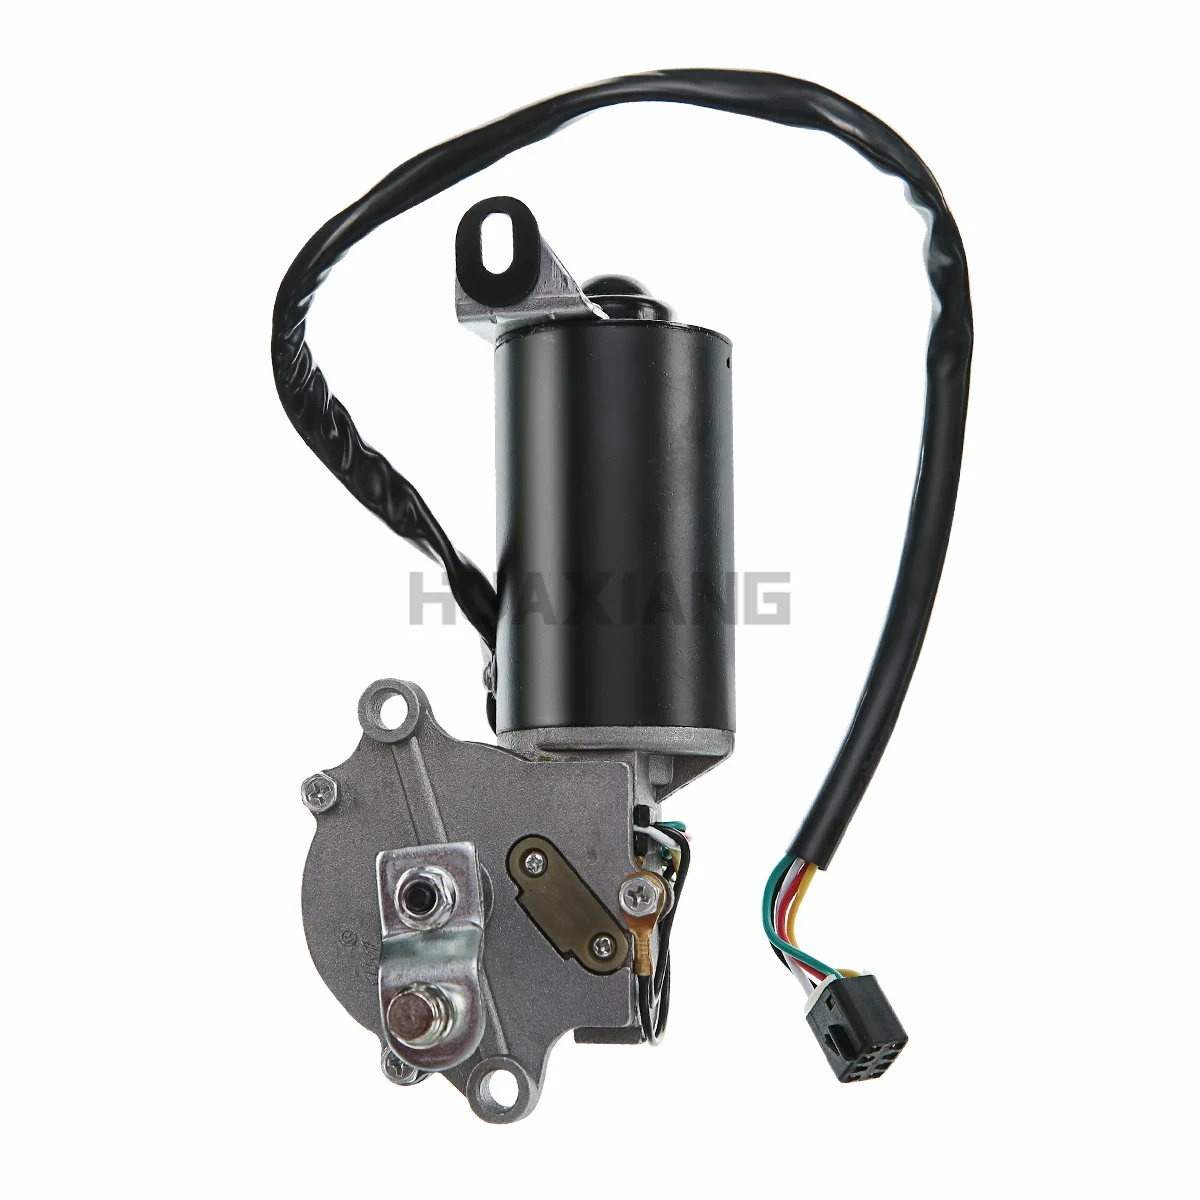 Cn Us Ca Gmr Front Windshield Wiper Motor For Jeep Wrangler Yj 87-95 40-432  85-432 56030005 849100-2178 - Buy Wiper Motor Product on 